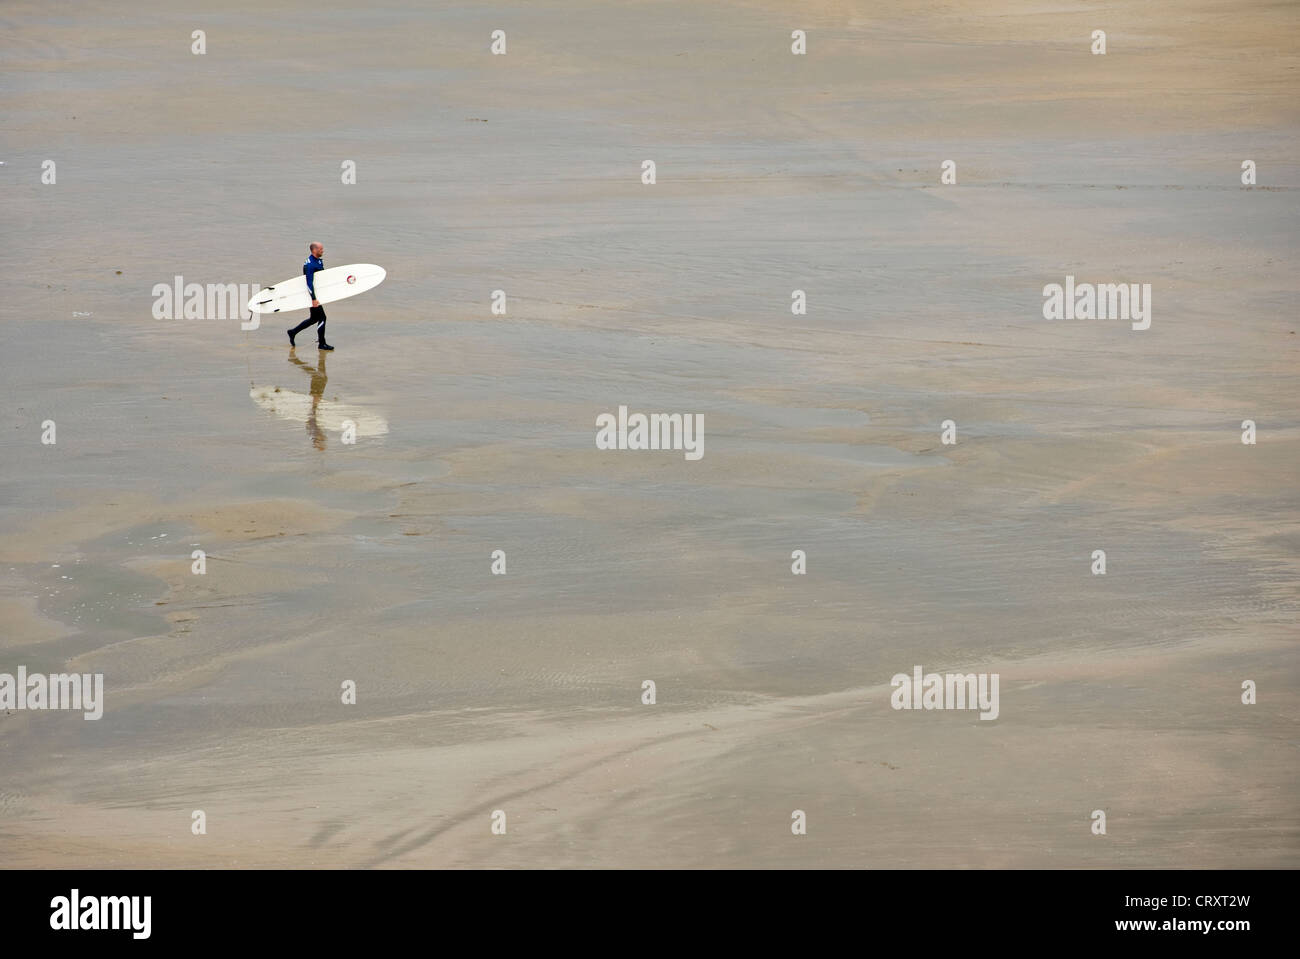 Solitary surfer on the beach at Bundoran, County Donegal. Stock Photo